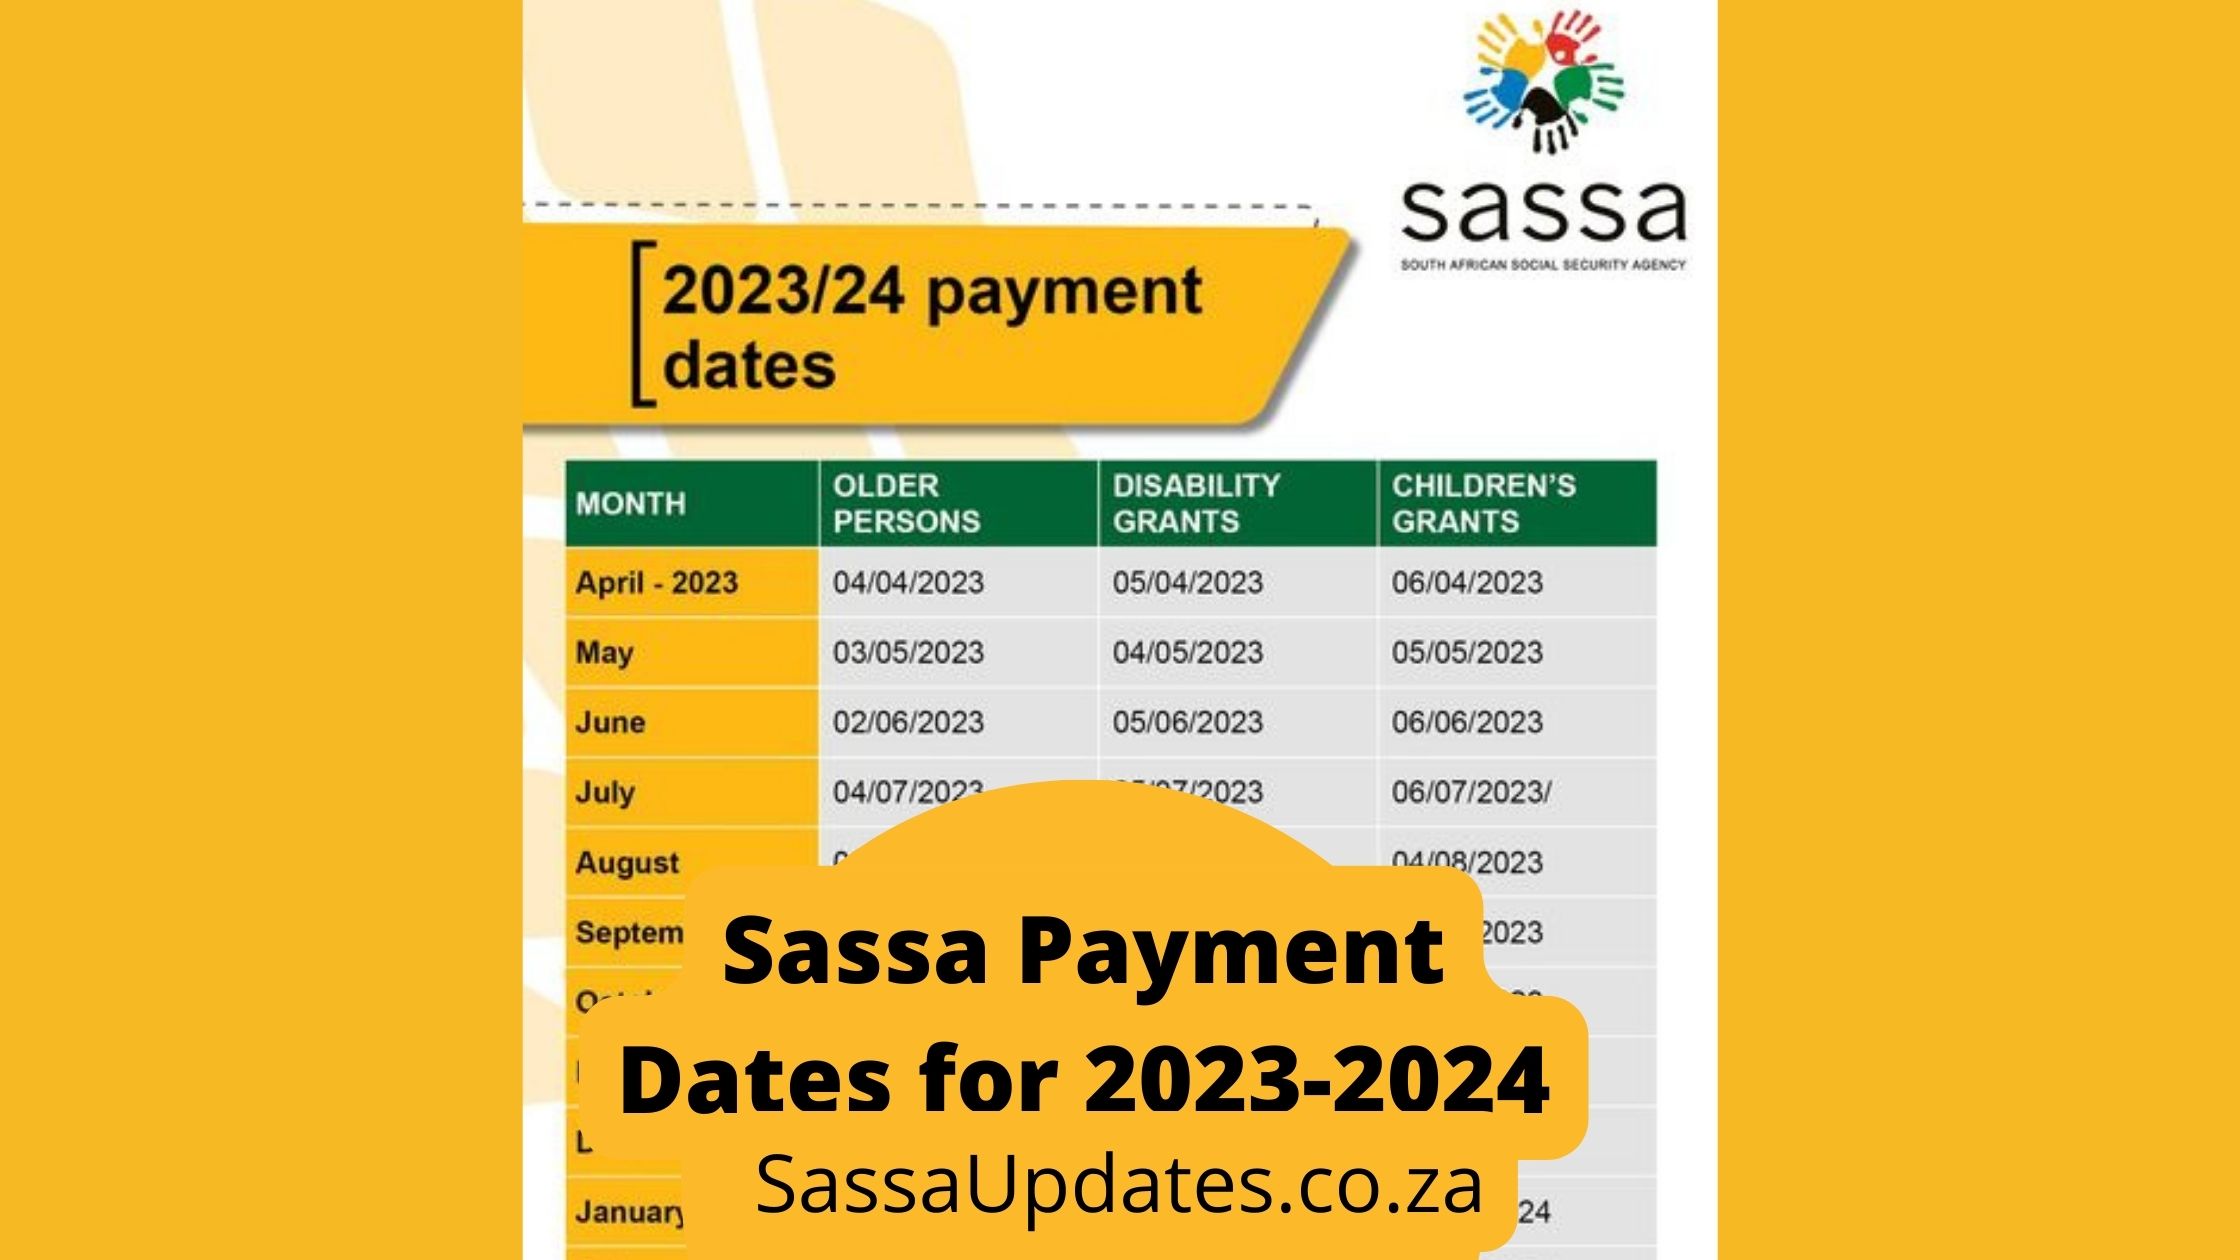 Sassa Payment Dates for 2023-2024